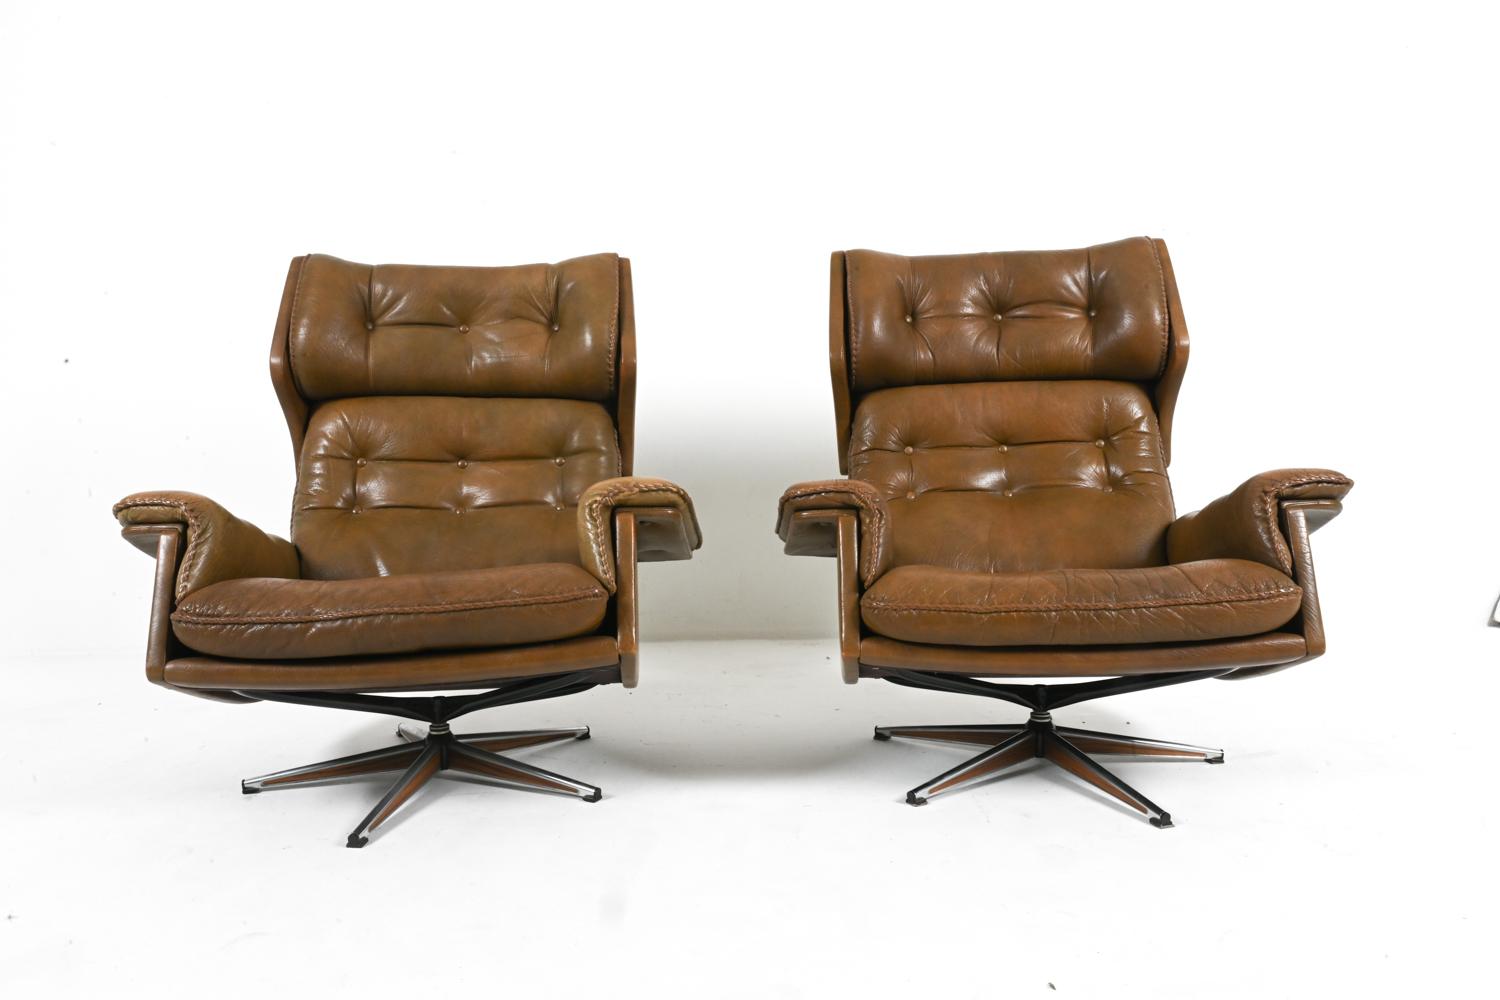 20th Century Pair of Buffalo Leather Swivel Chairs By Arne Norell, Swedish 1960's For Sale